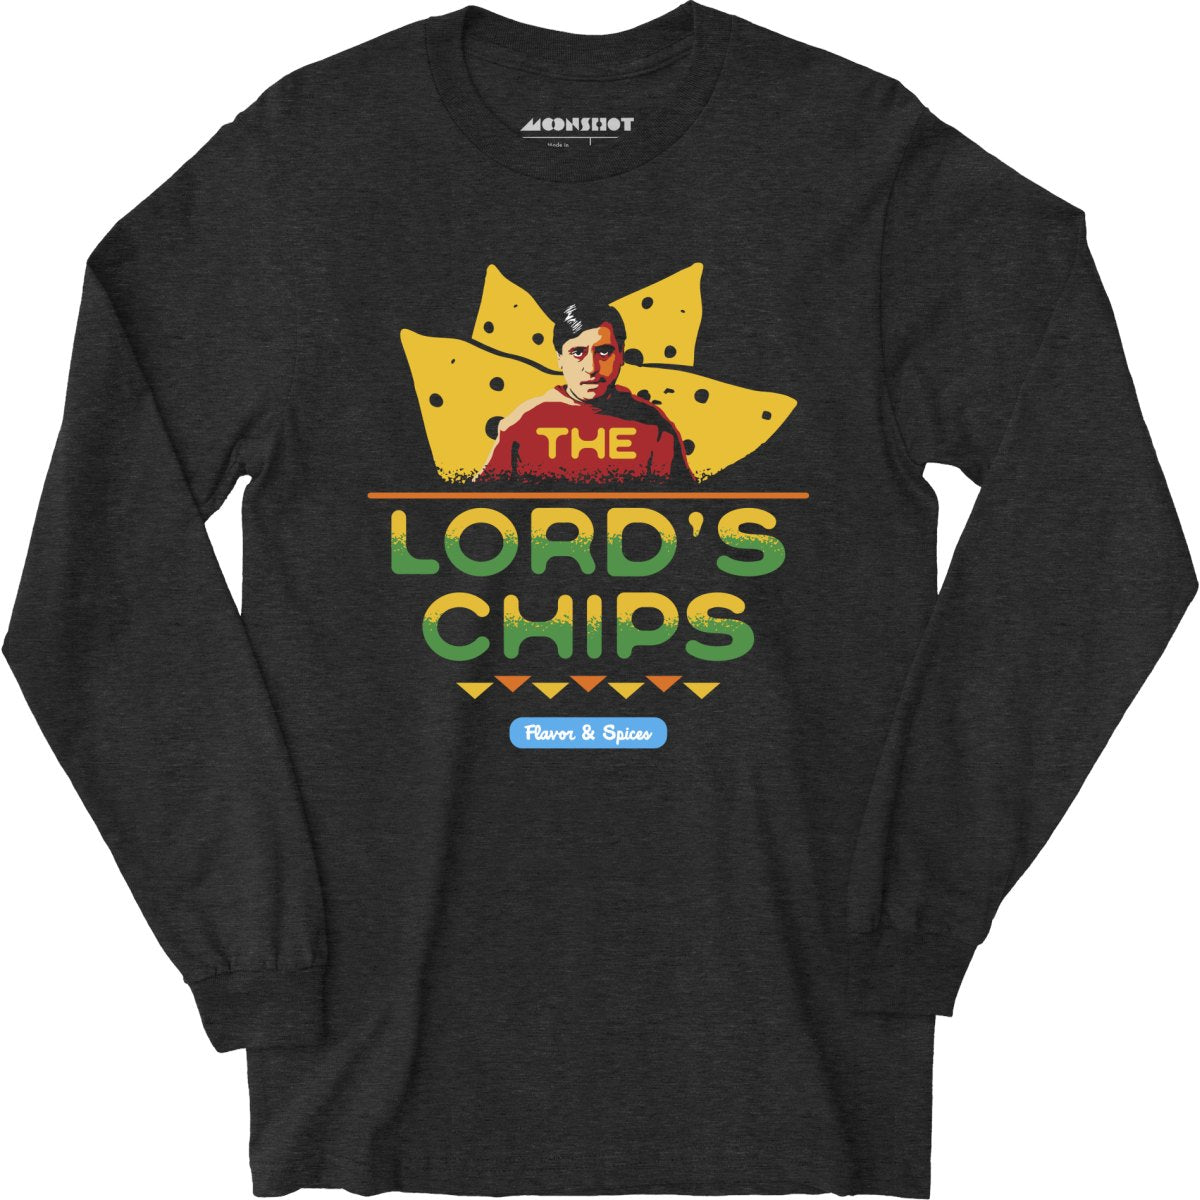 The Lord's Chips - Long Sleeve T-Shirt